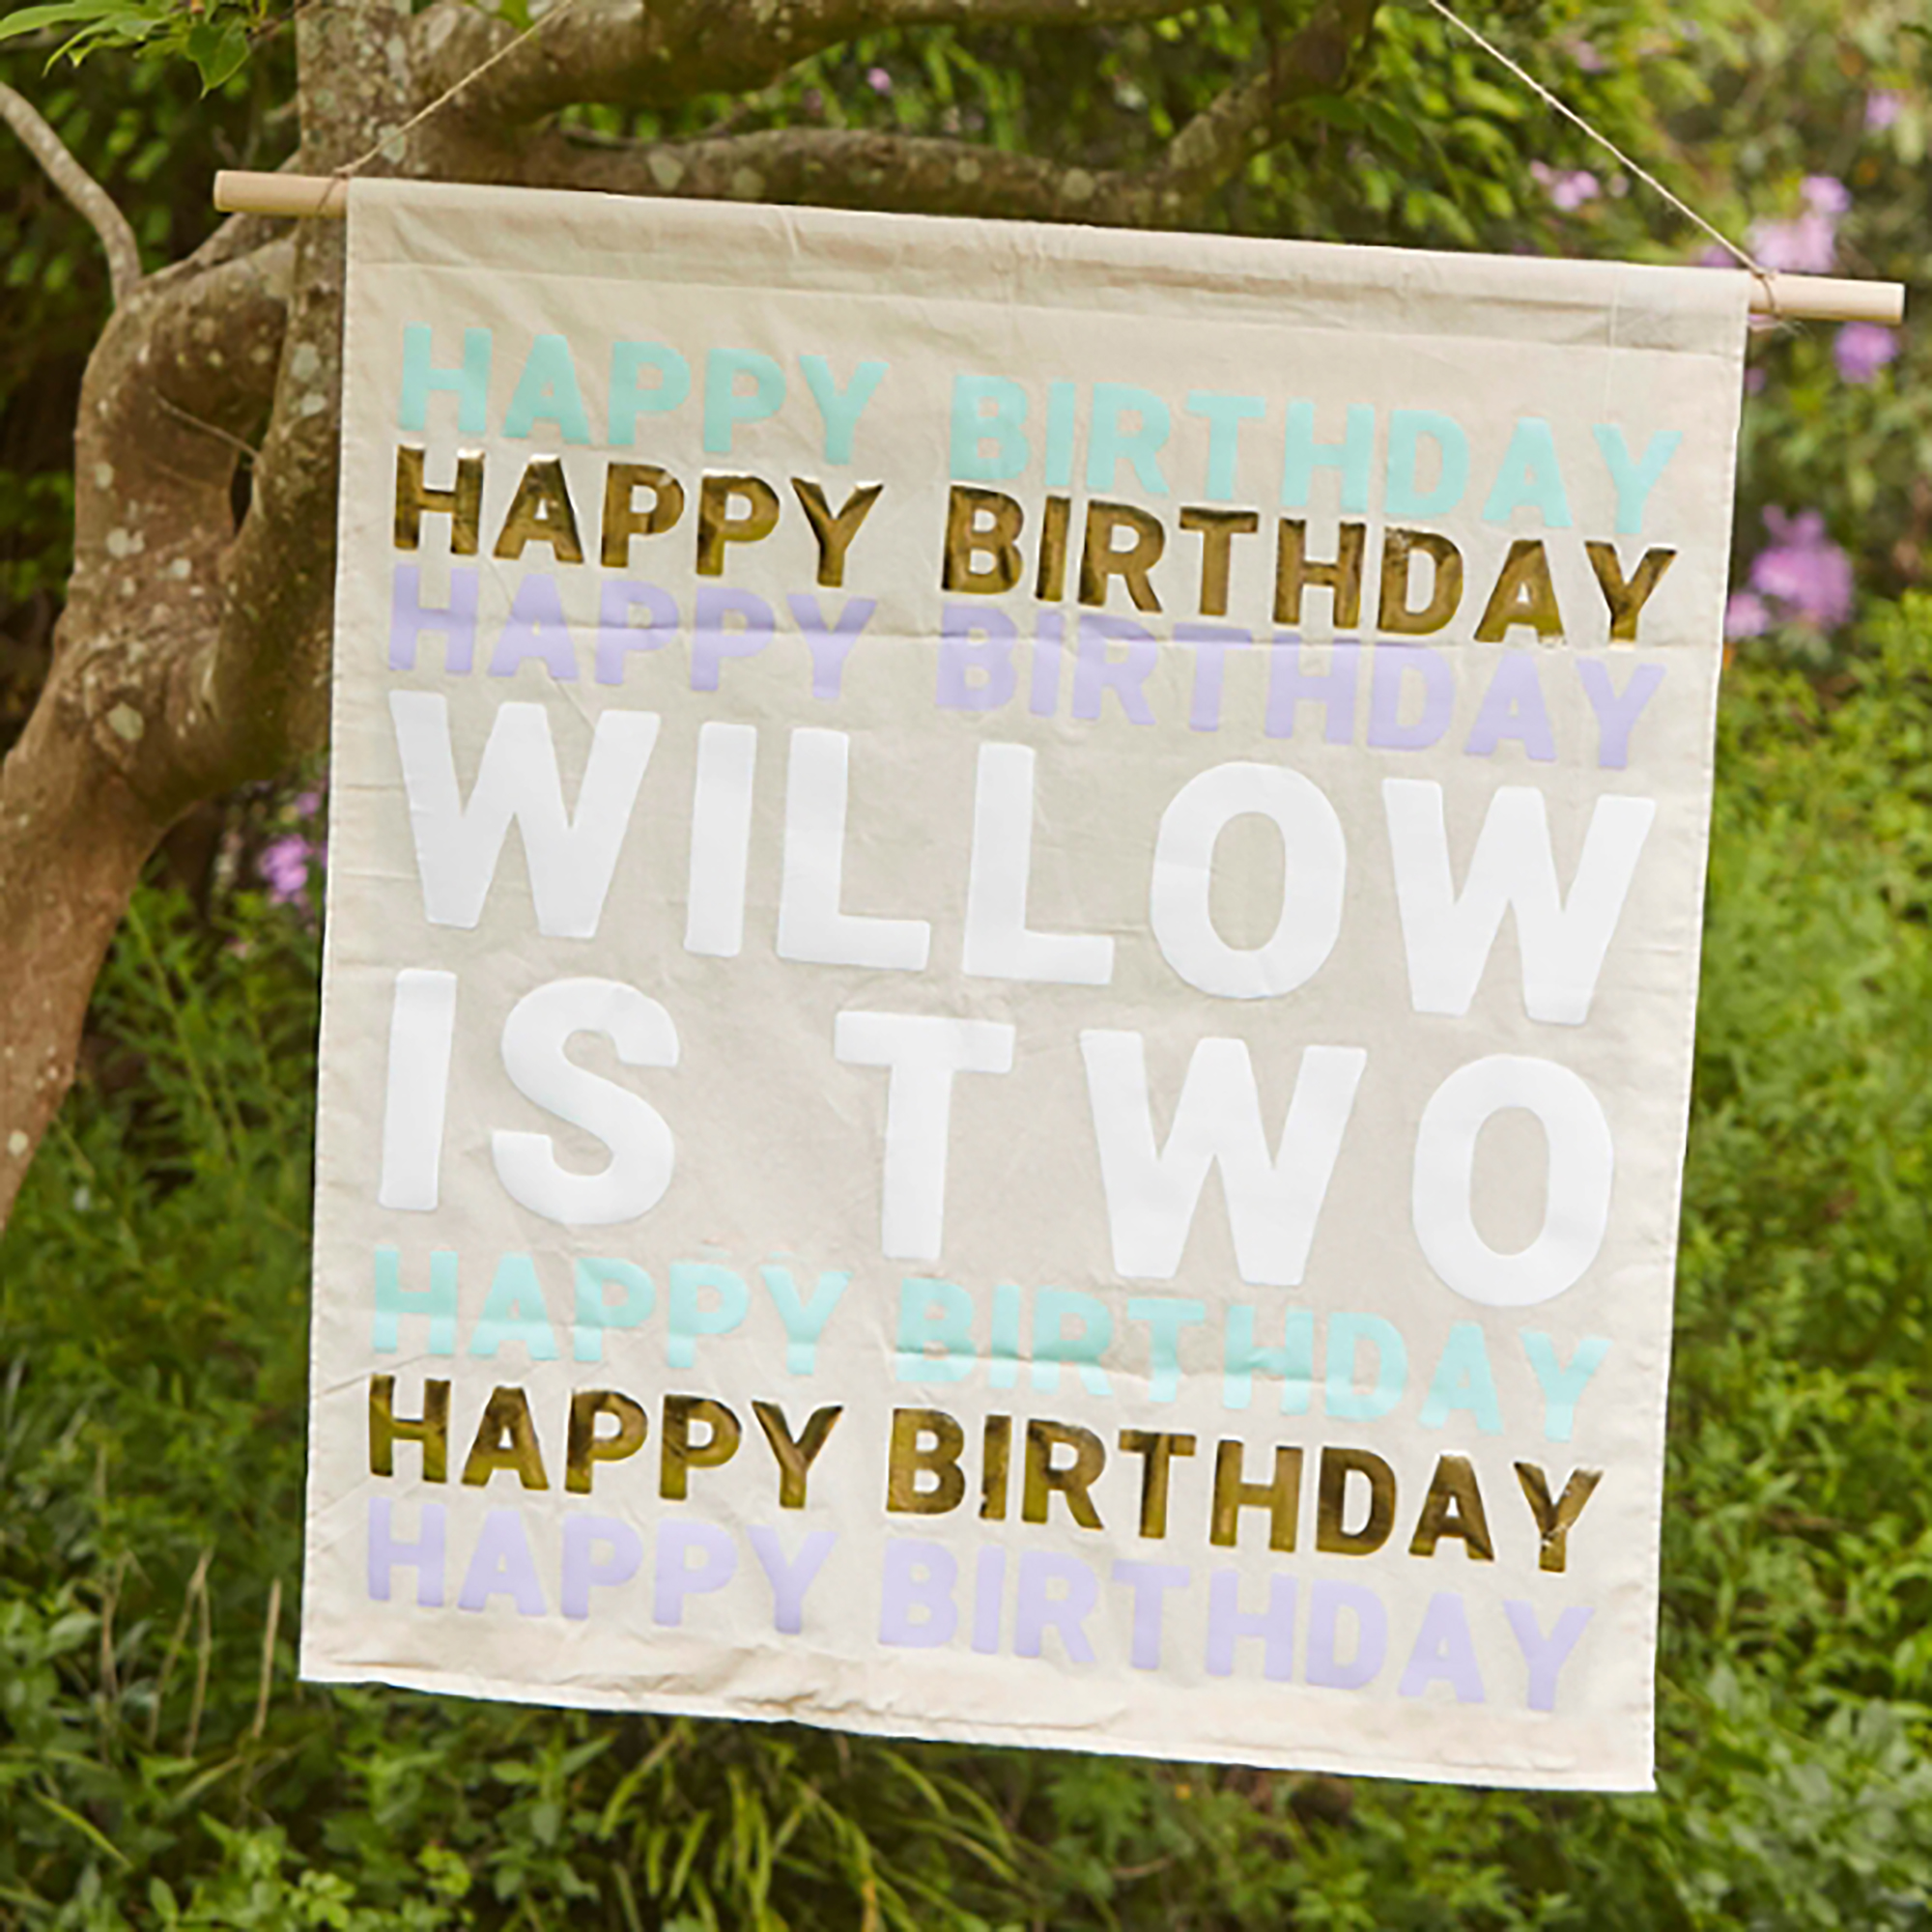 Cricut: How to Make a Birthday Banner with Smart Iron-on Vinyl